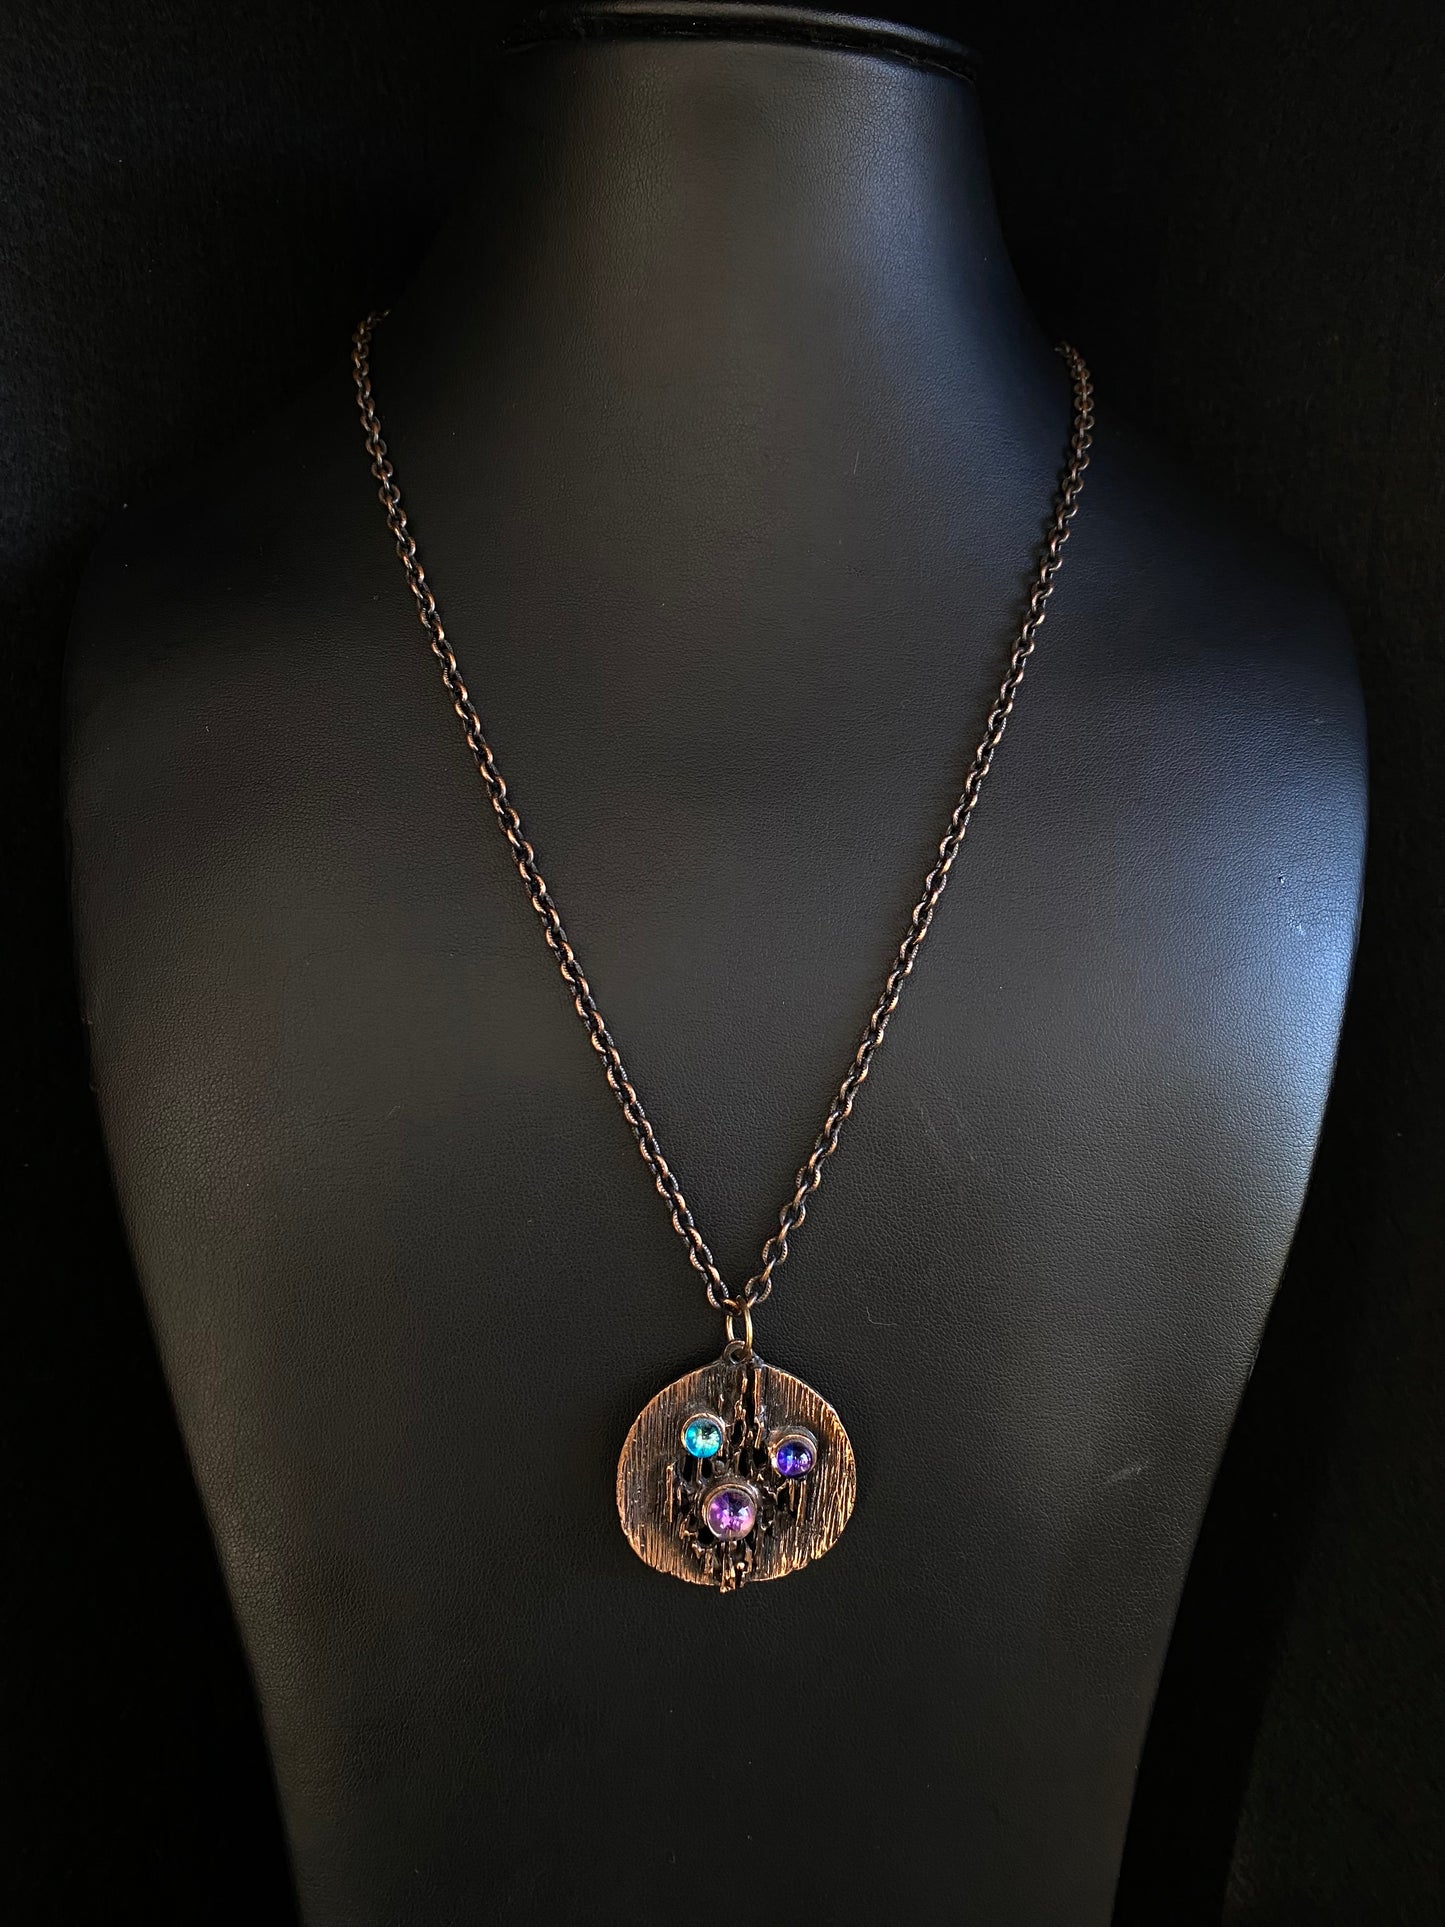 Retro long necklace and circle pendant